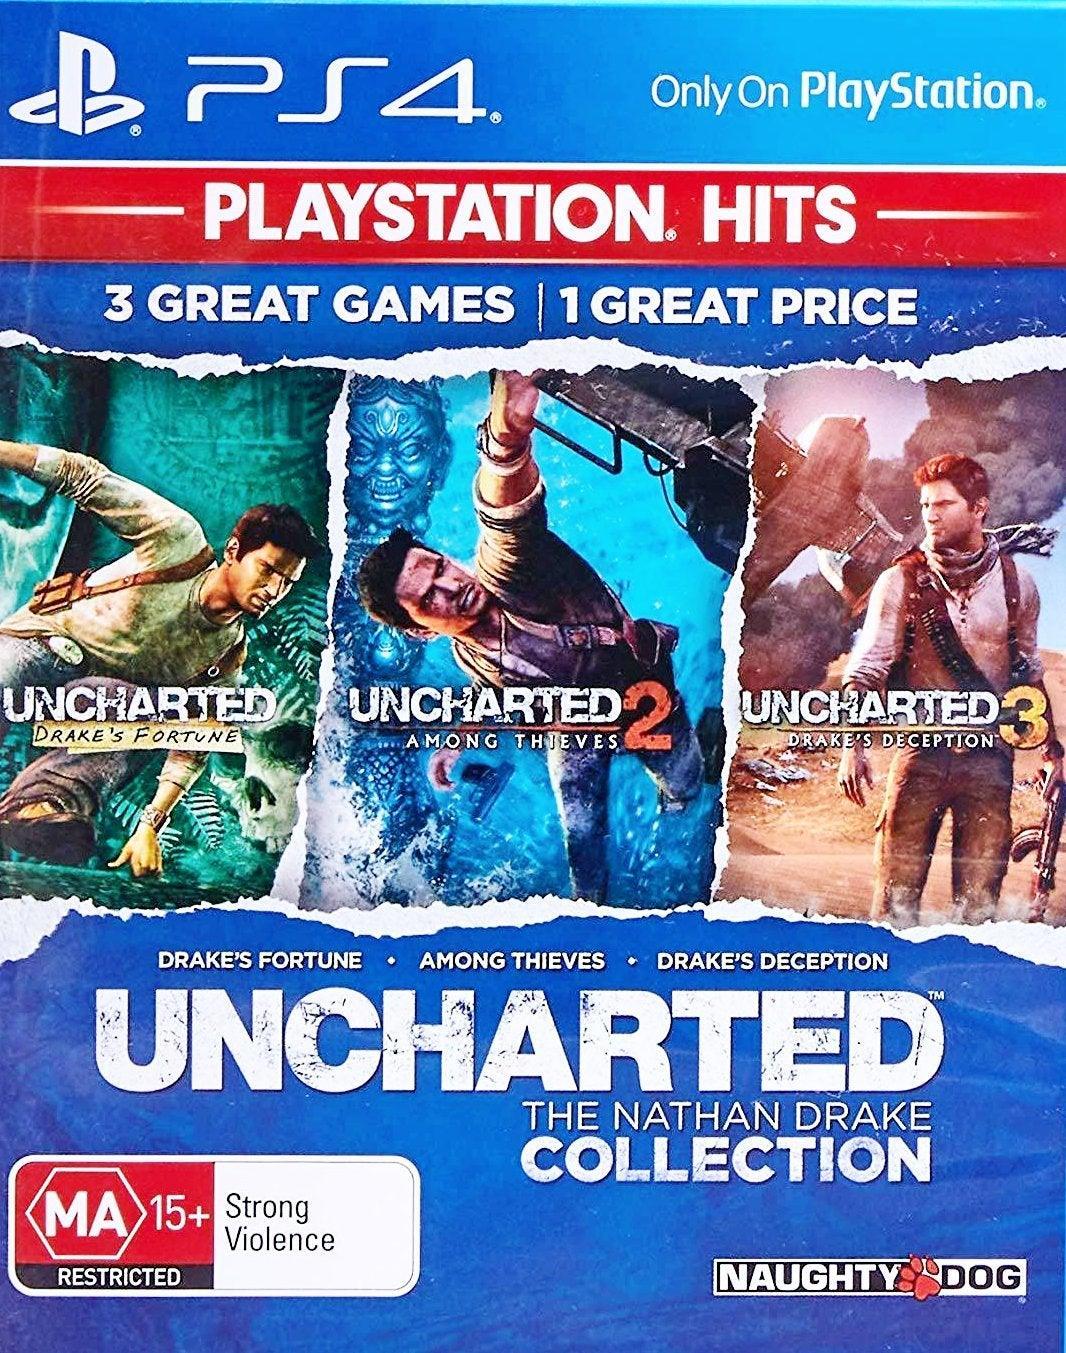 Uncharted The GD – 4 /Playstation PS4 Nathan Collection Games / Drake